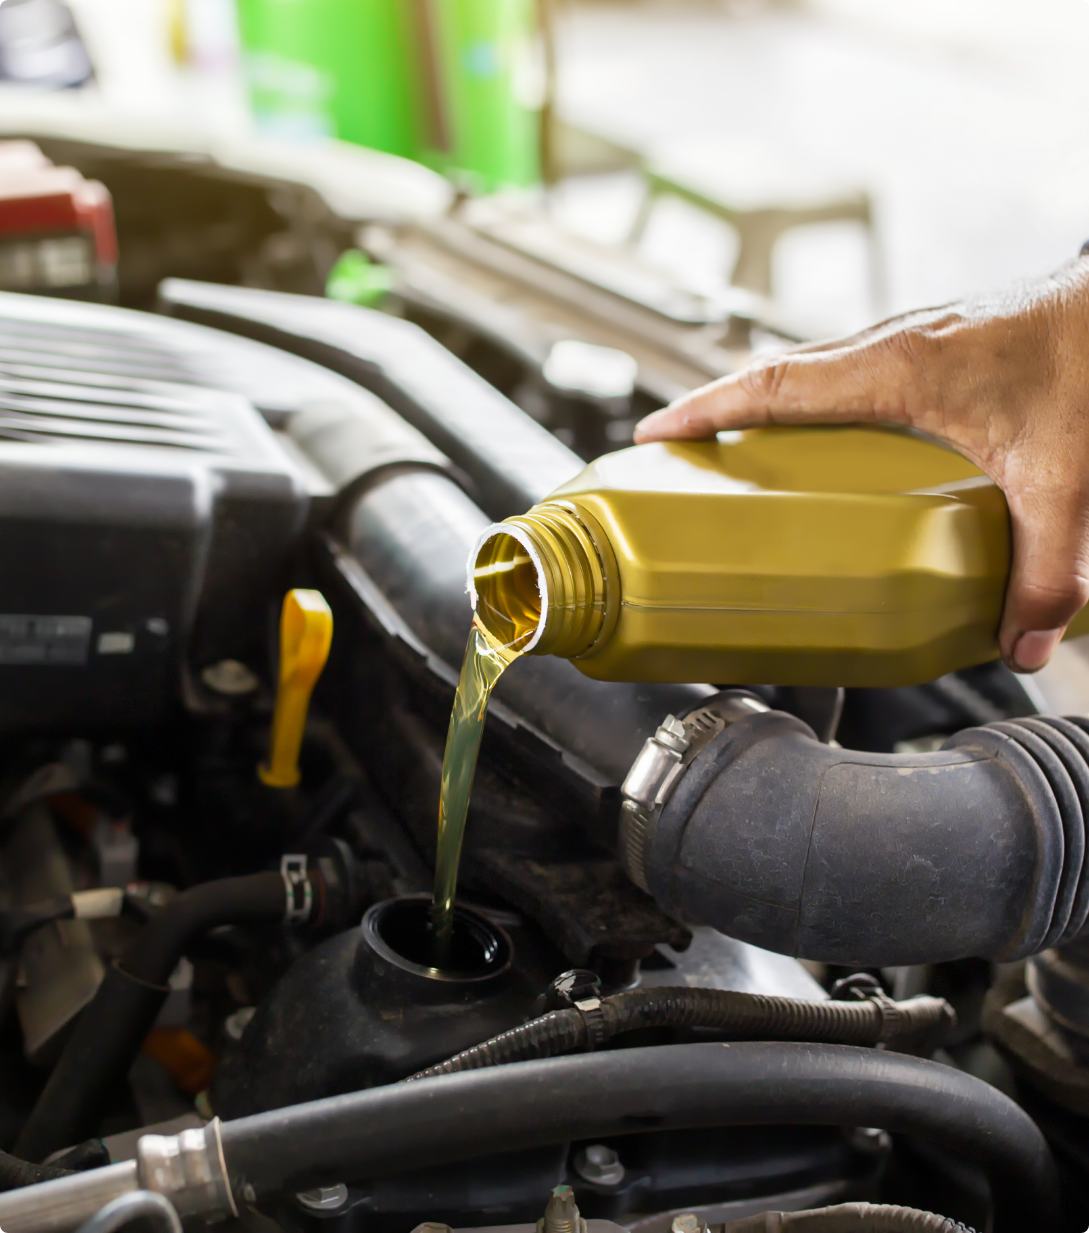 car-mechanic-replacing-pouring-fresh-oil-into-engine-maintenance-repair-service-station